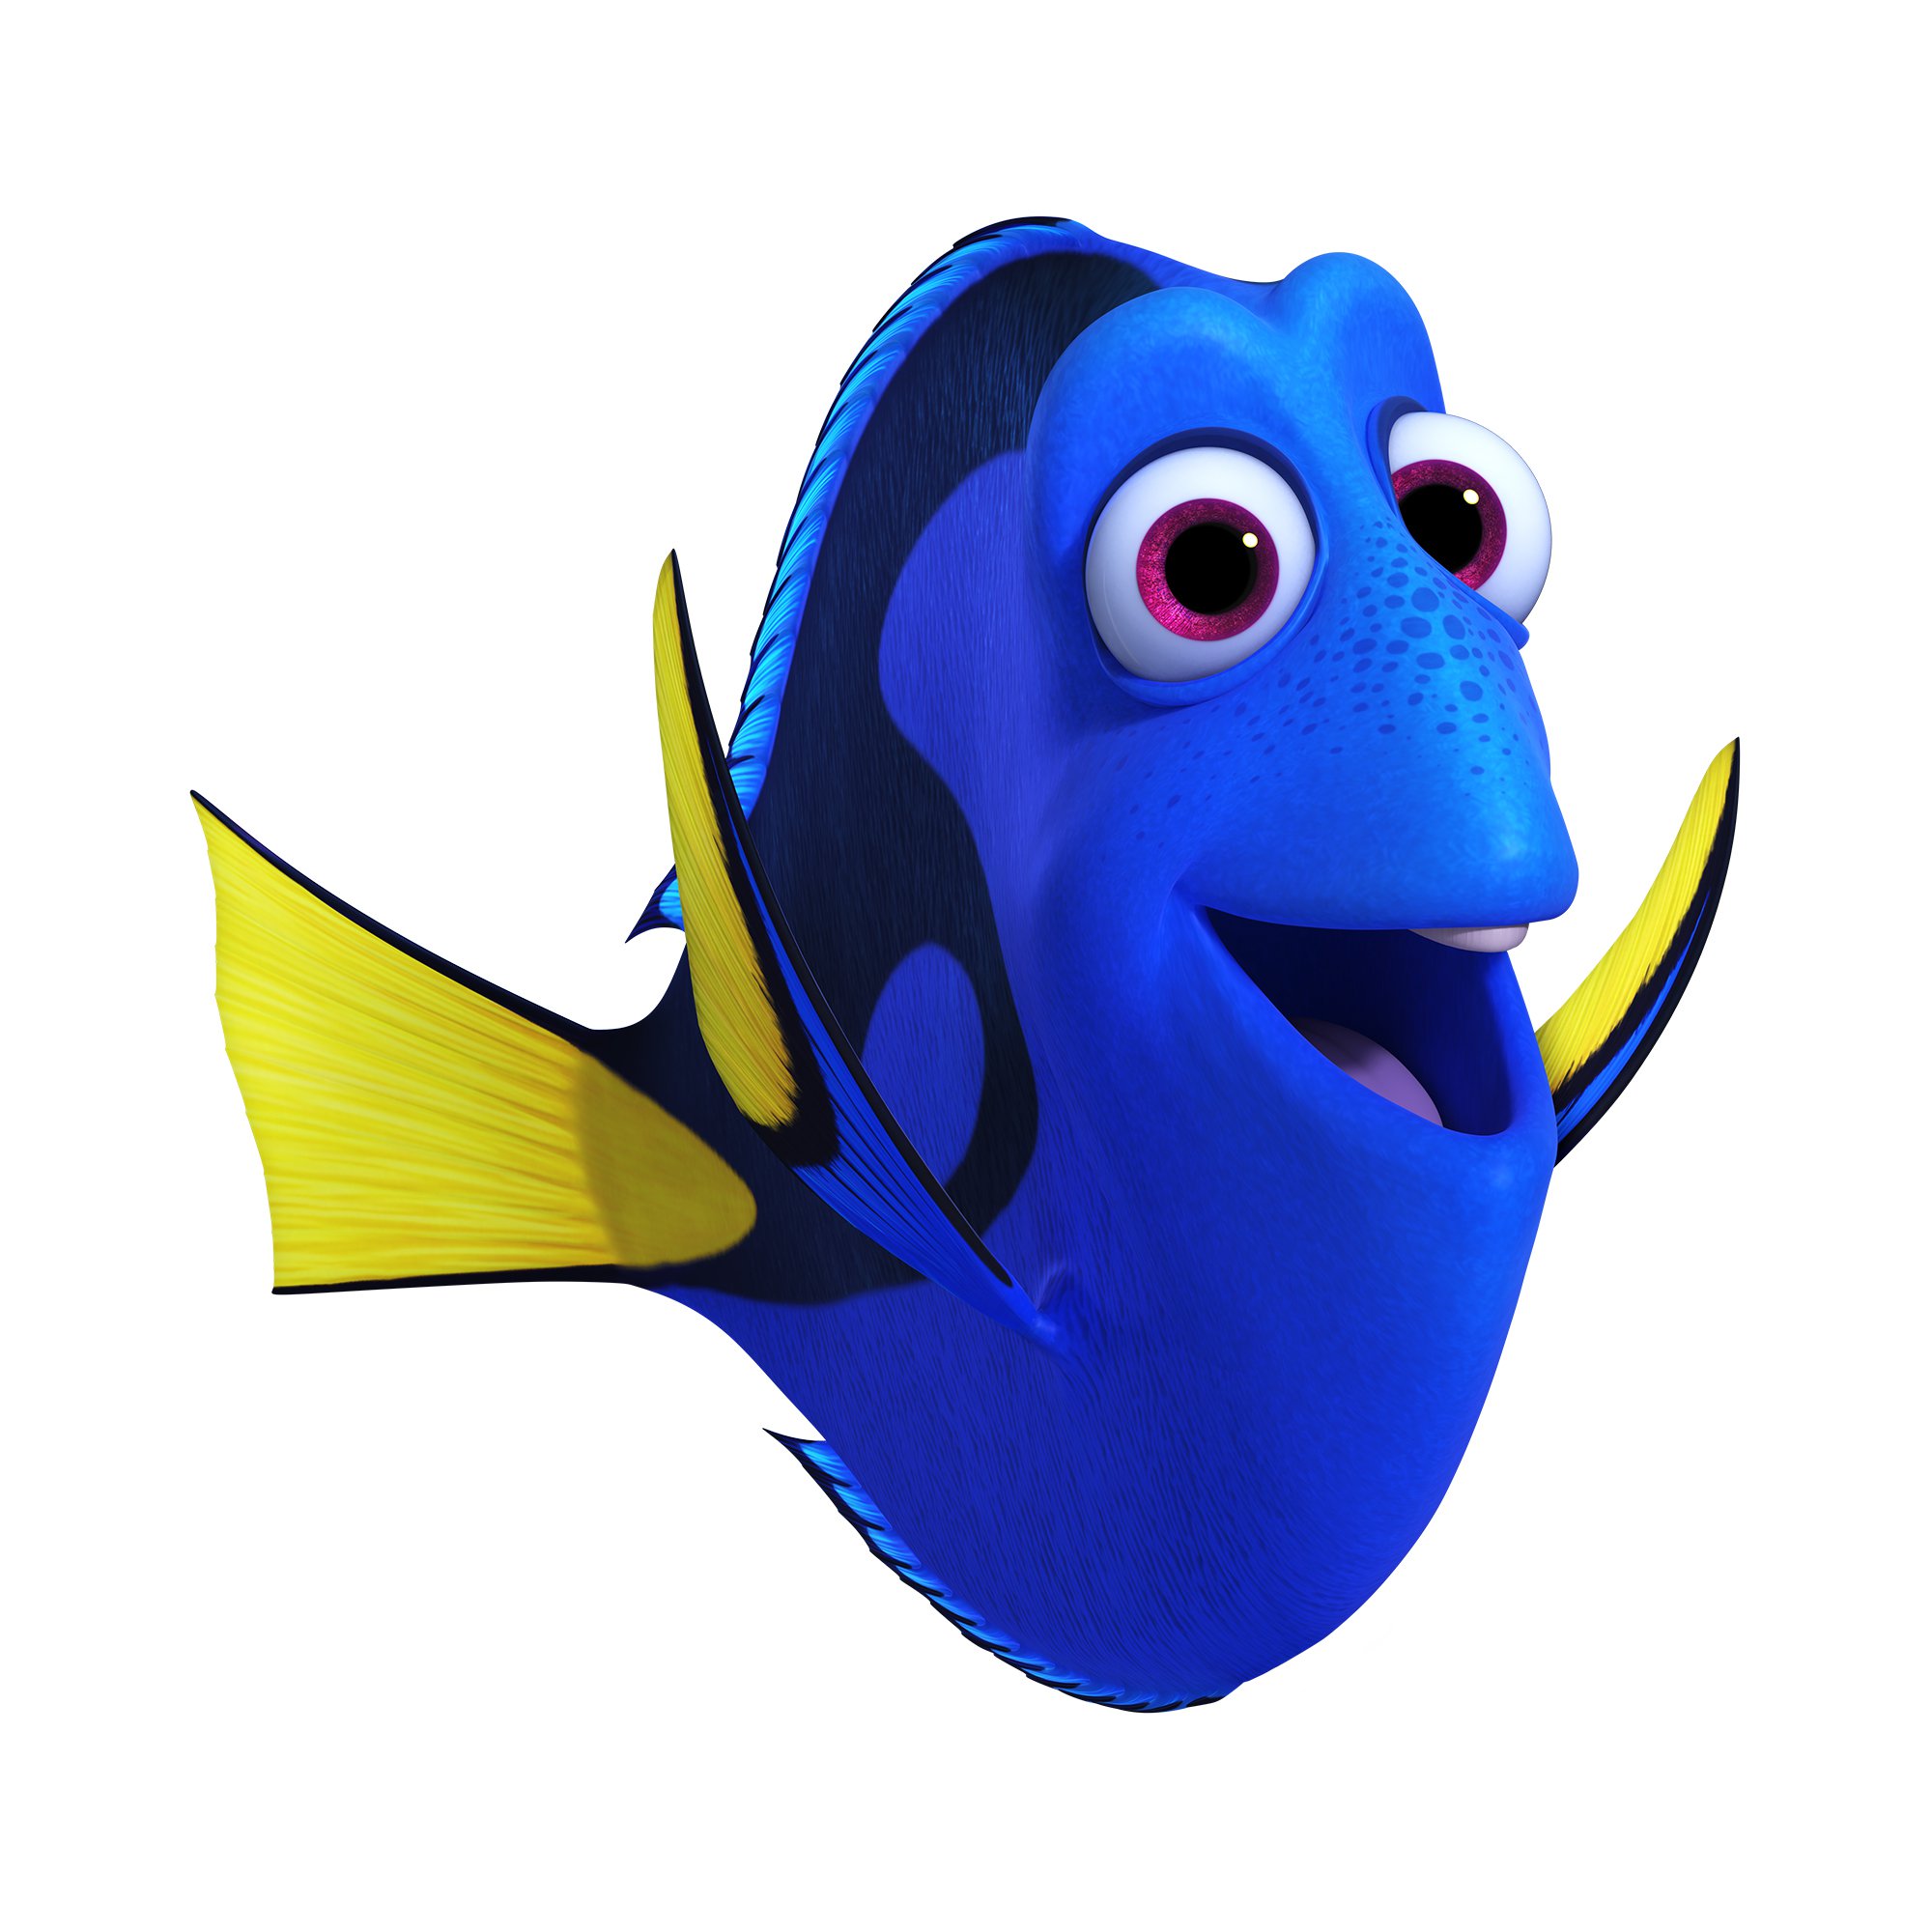 download the last version for iphoneFinding Dory